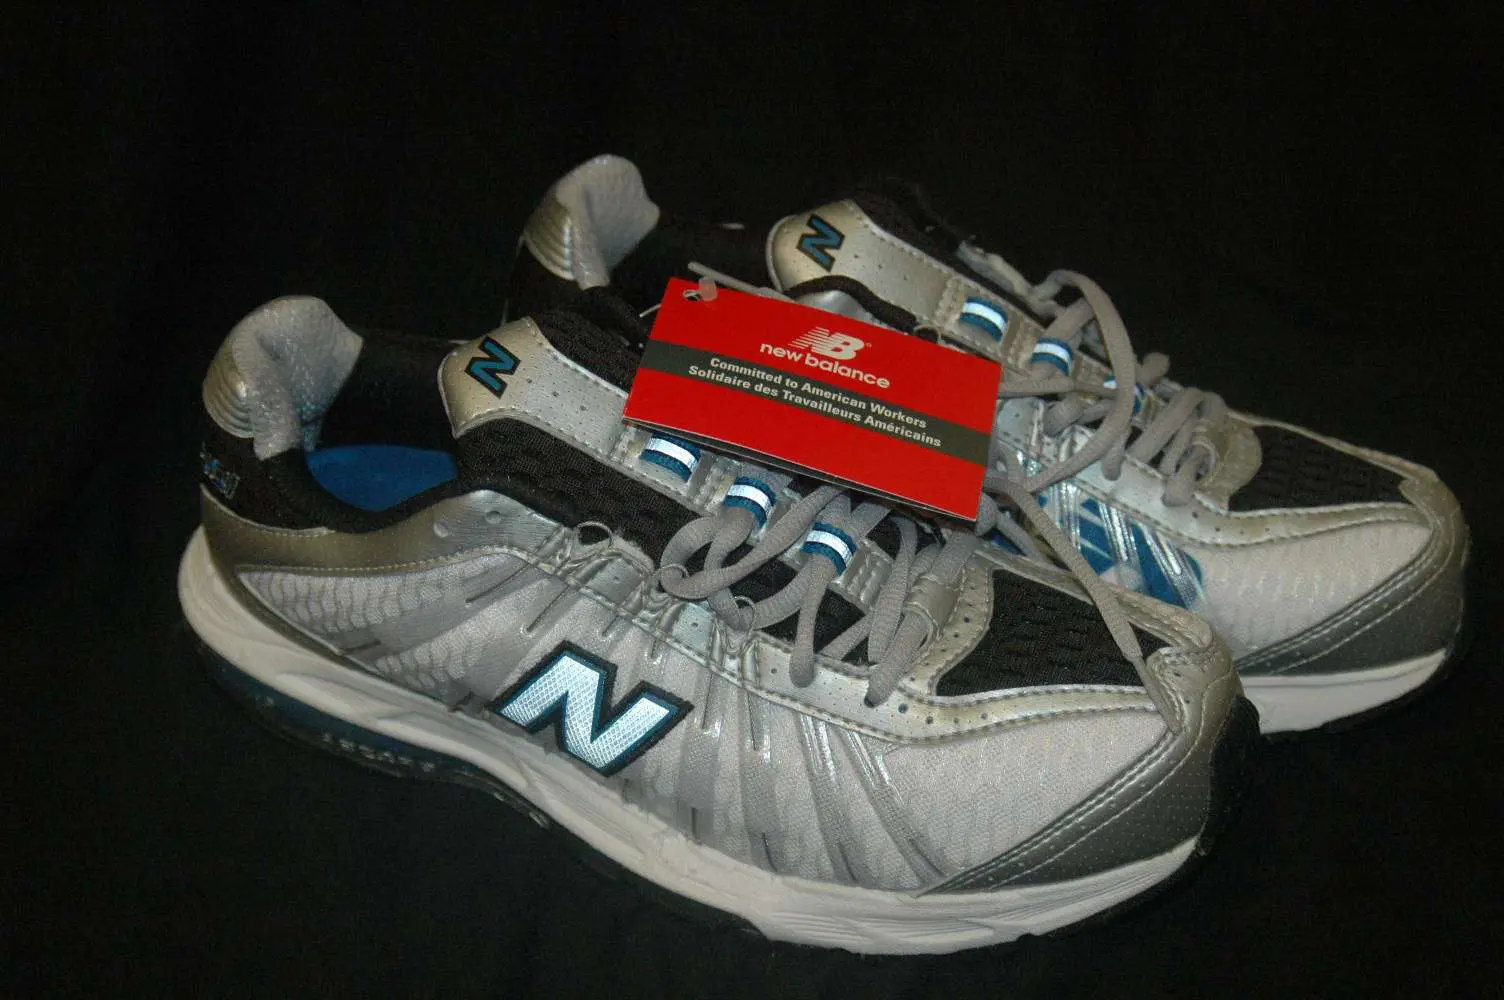 New Balance Shoesthe only tennis shoe made in USA?